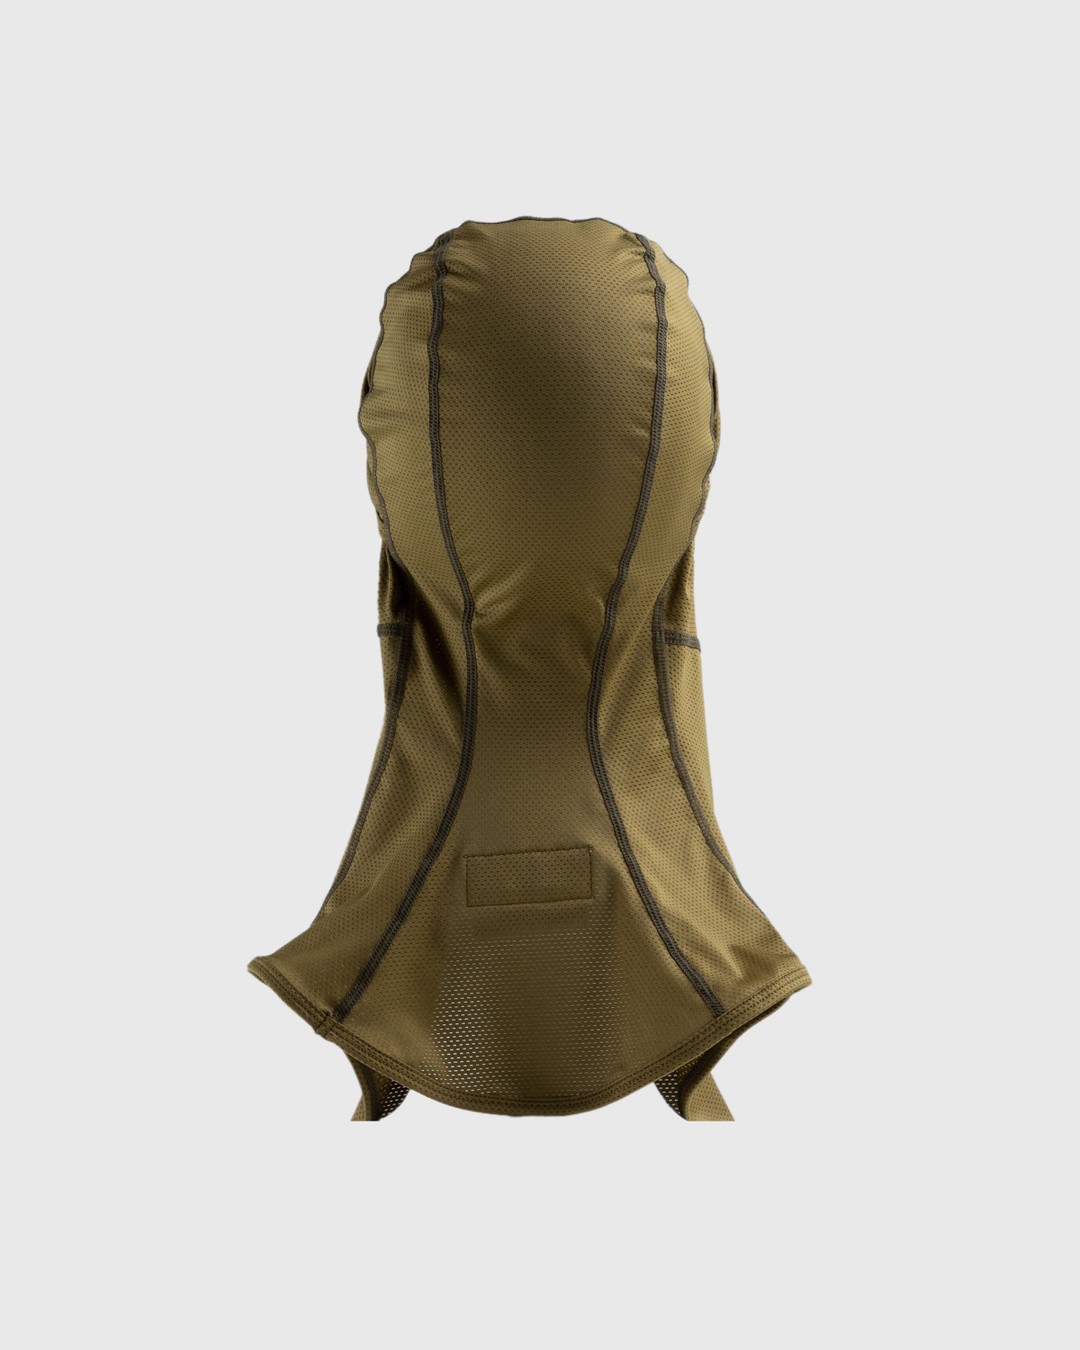 Post Archive Faction (PAF) – 5.0 Balaclava Right Olive Green - Balaclavas - Green - Image 3